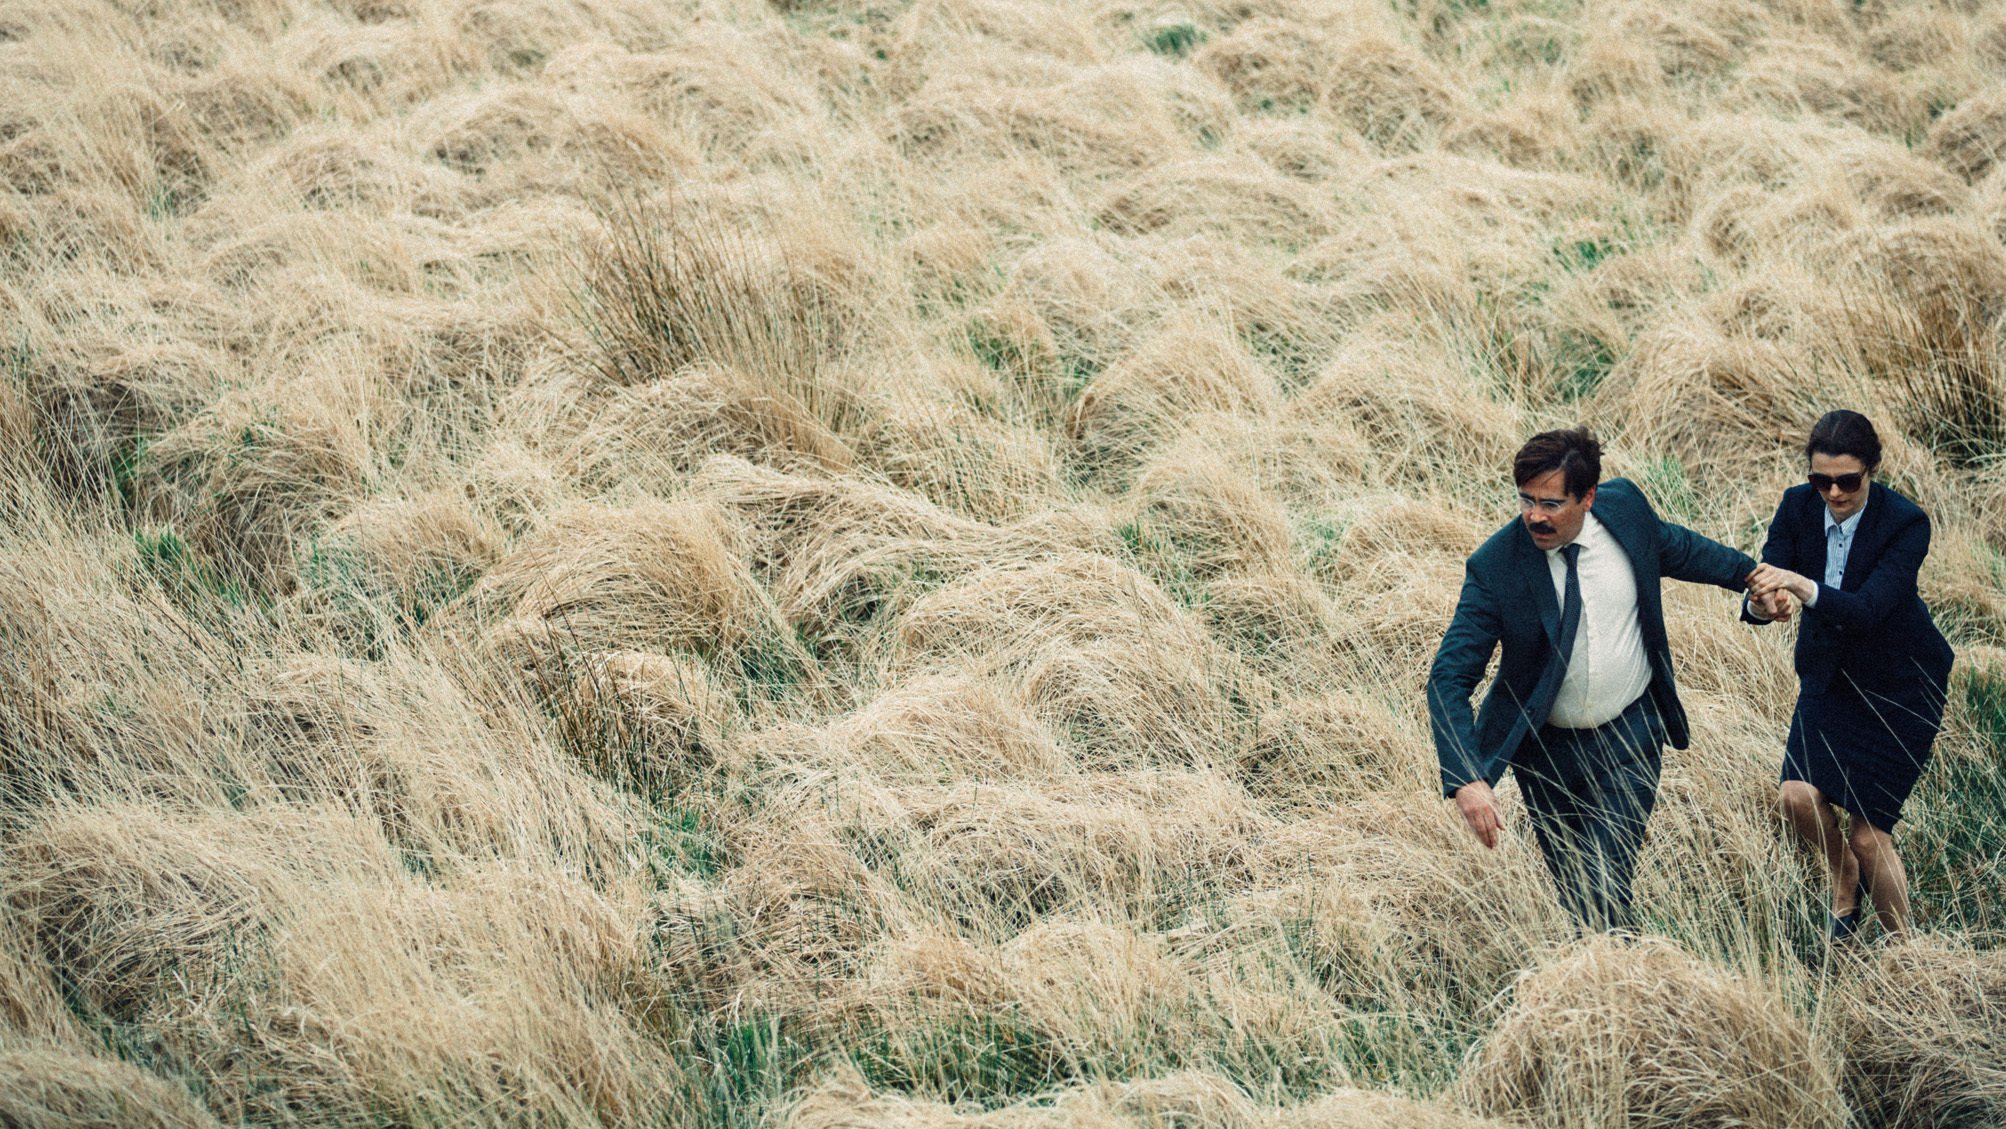 Image from the movie "The Lobster"